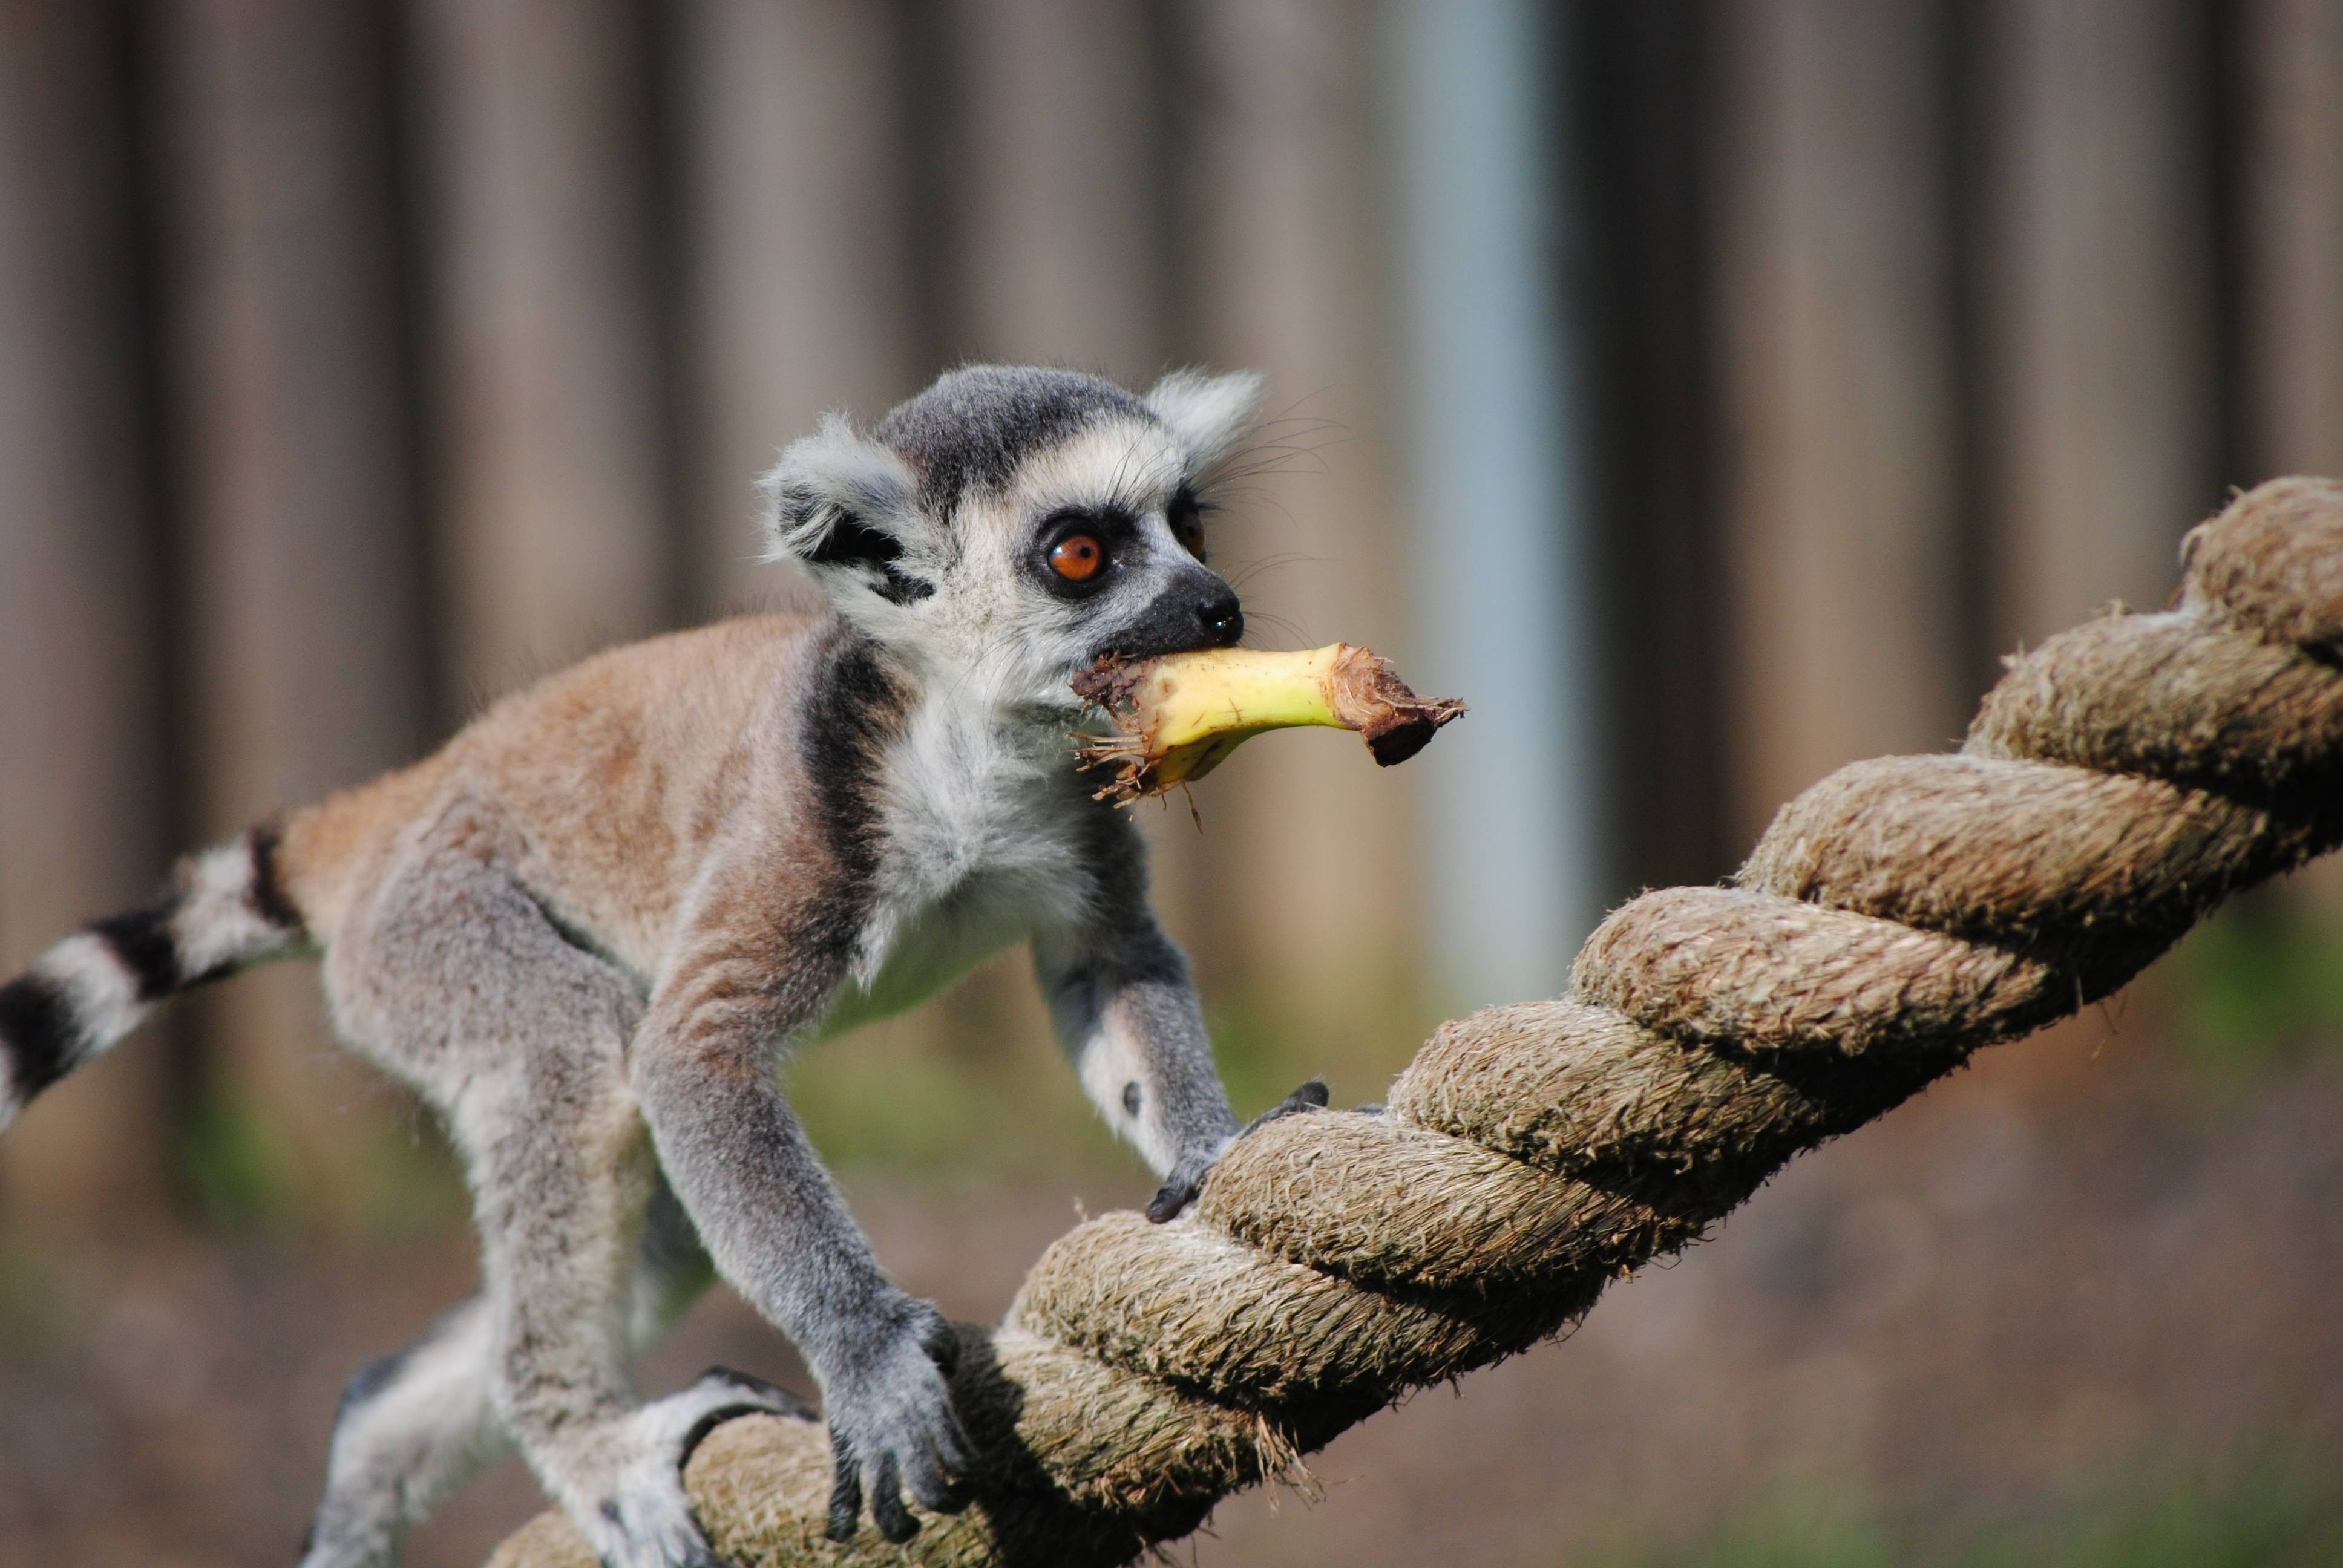 Windows Backgrounds animals, food, cable, stroll, animal, lemur, rope